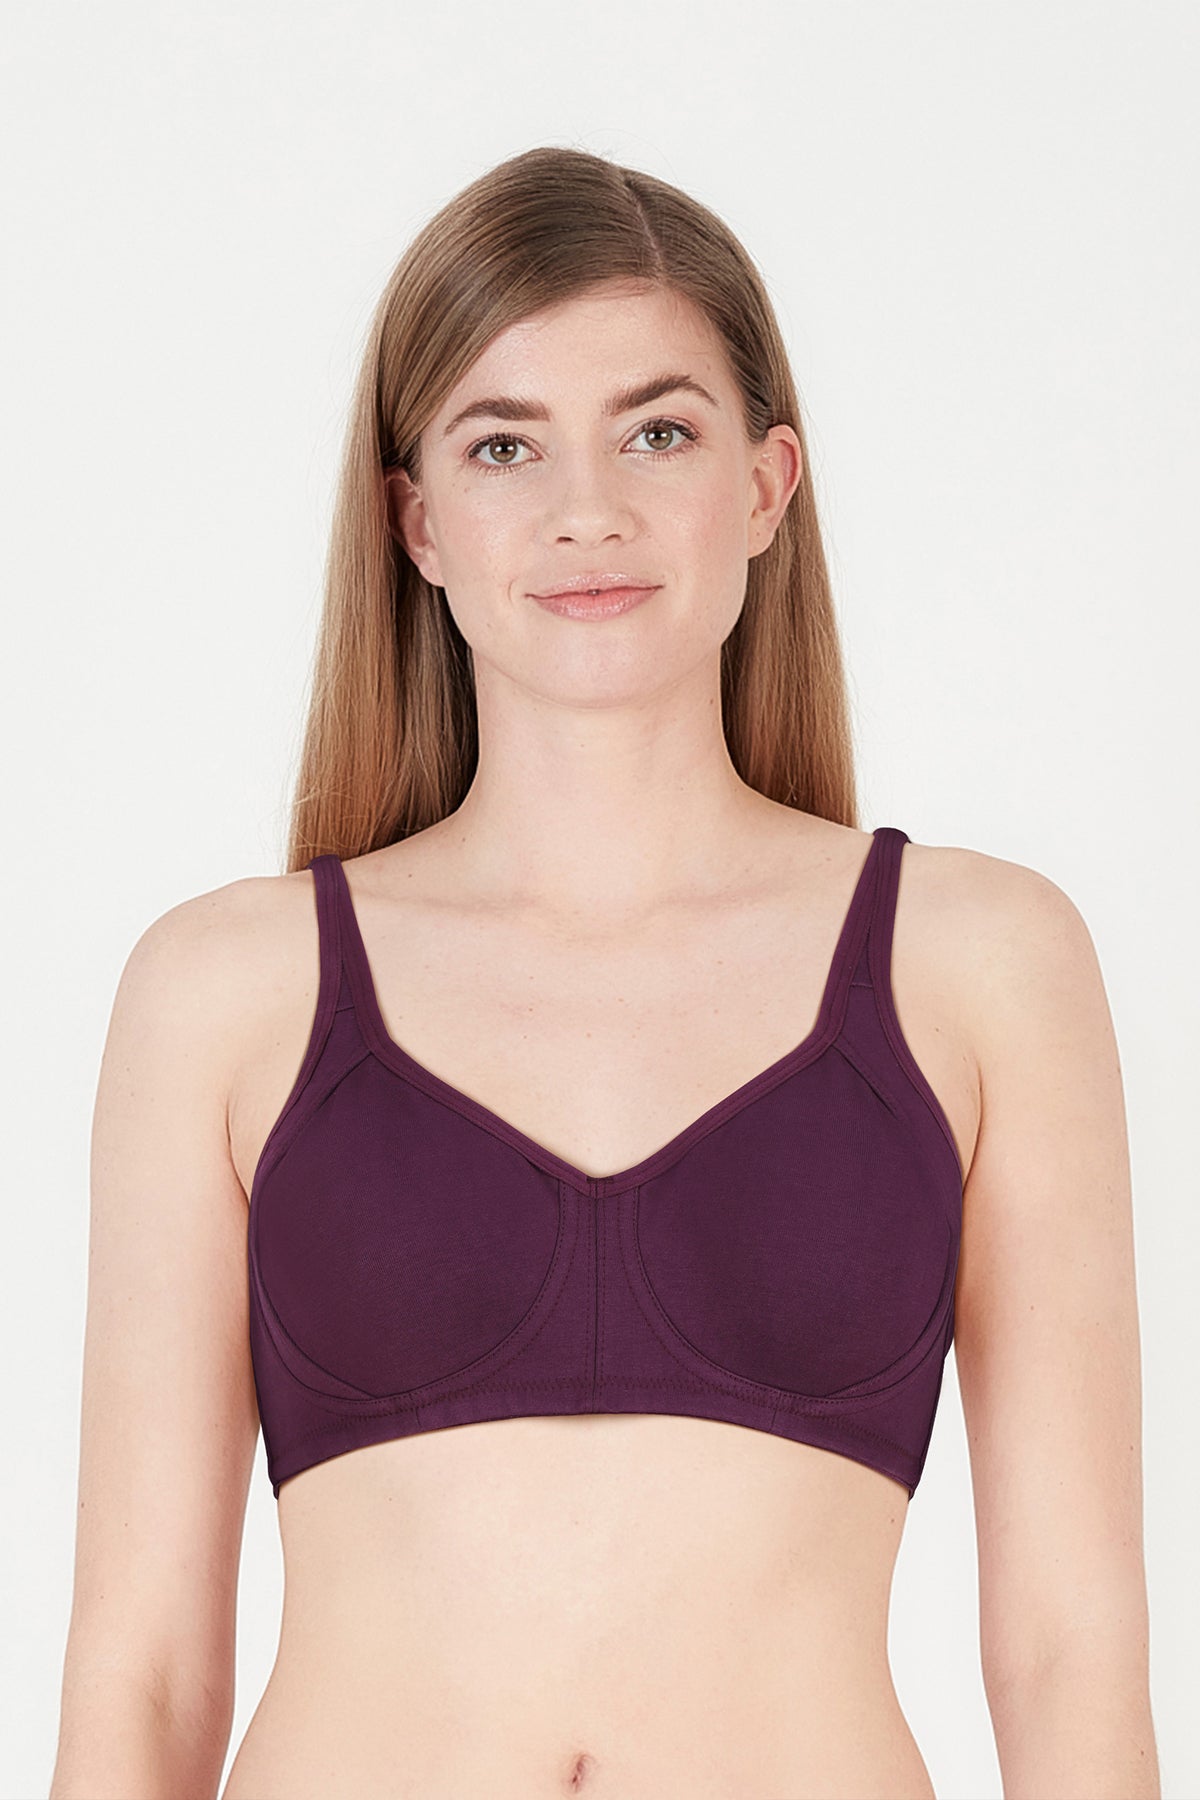 BLS - Calantha Non Wired And Non Padded Cotton Bra - Purple